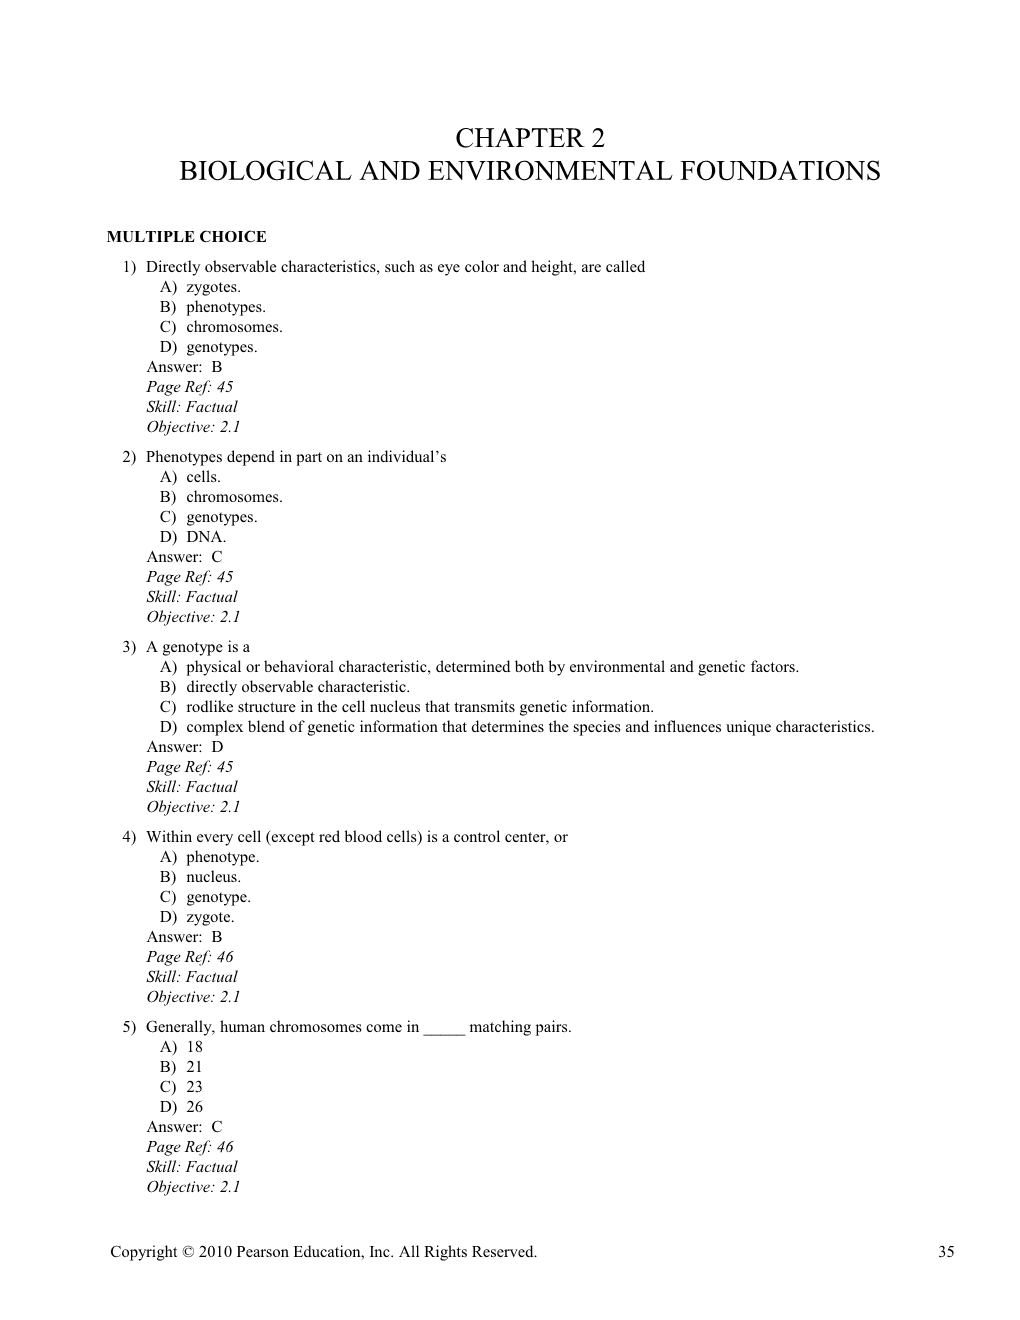 Chapter 2 Biological and Environmental Foundations